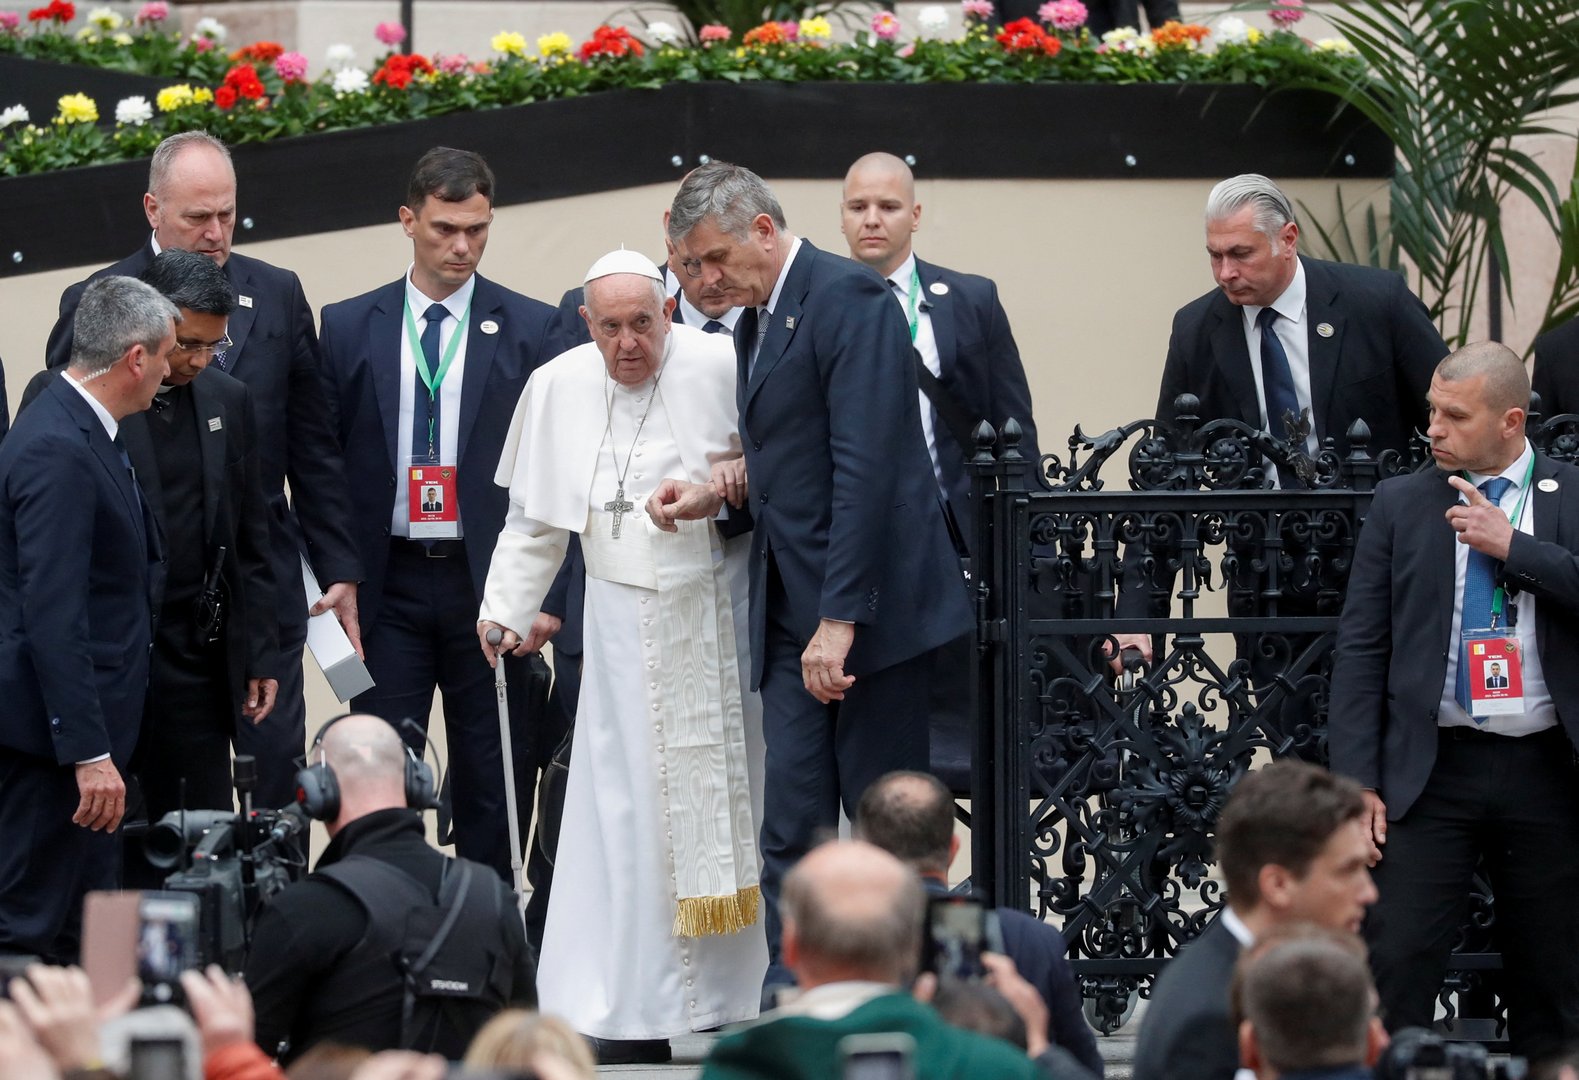 image Pope Francis in Hungary, warns of rising nationalism in Europe